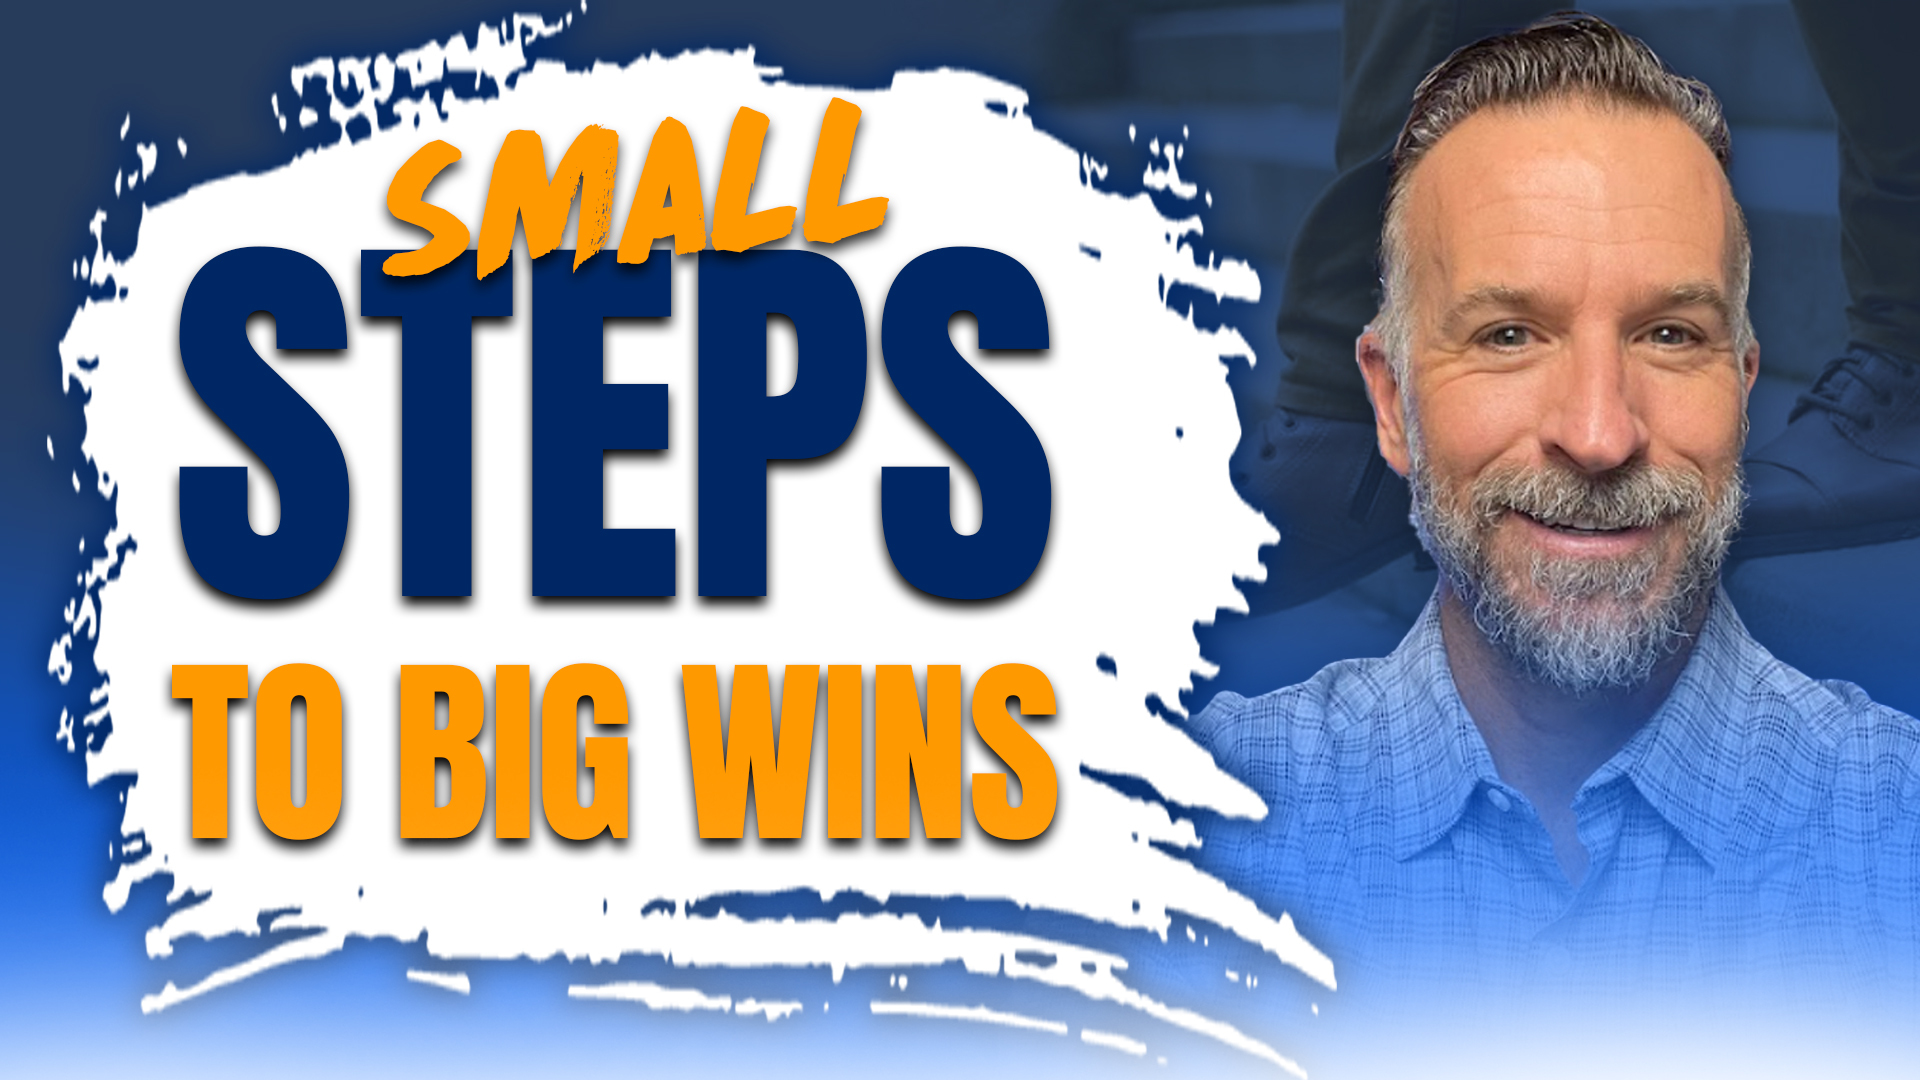 Flow Over Fear: Small Steps to Big Wins